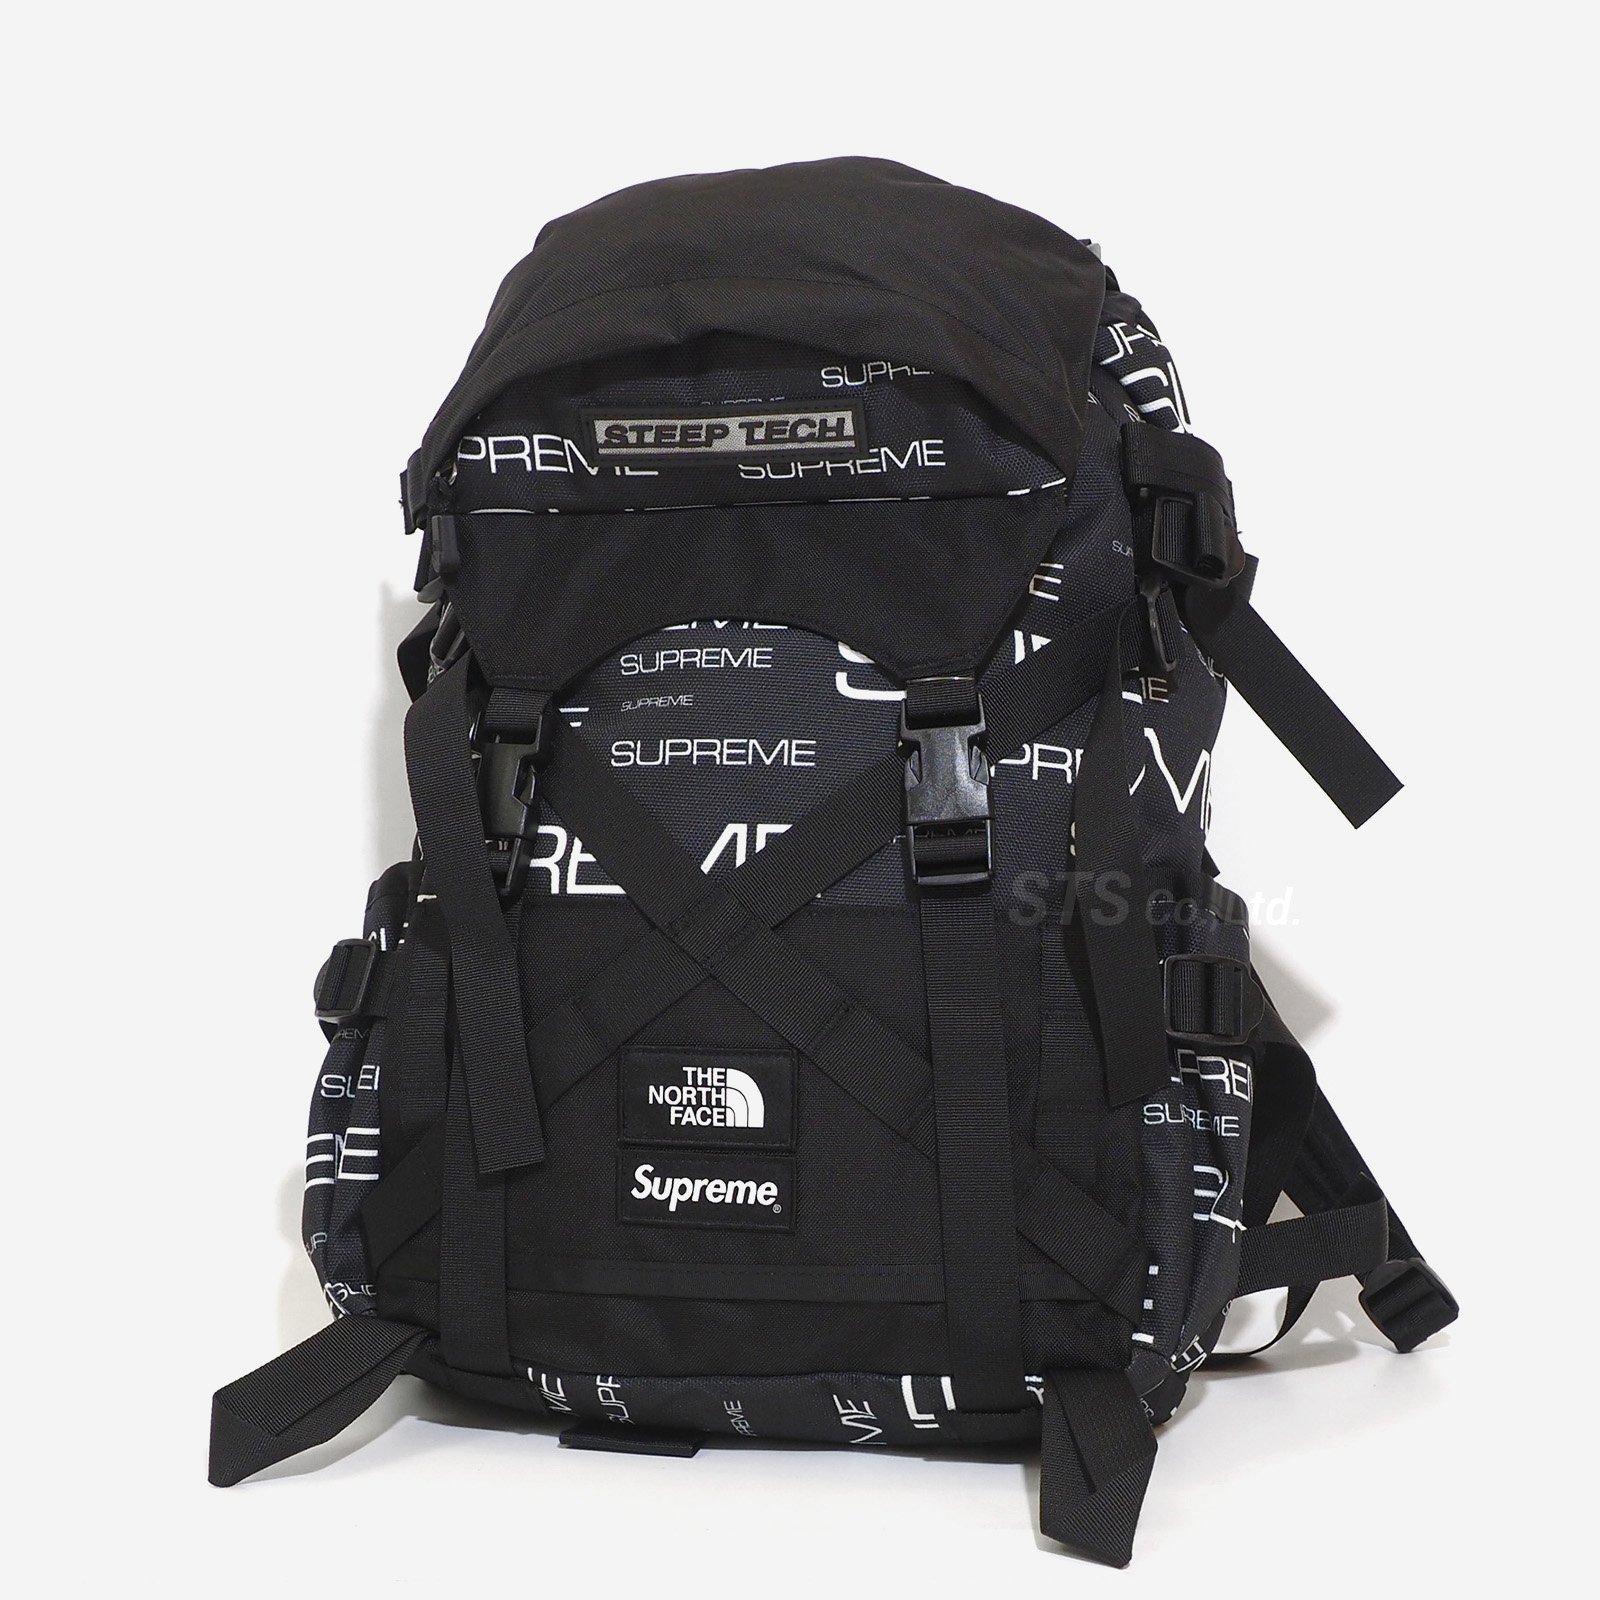 Supreme north face Steep Tech Backpack | www.orangebluehome.com.br